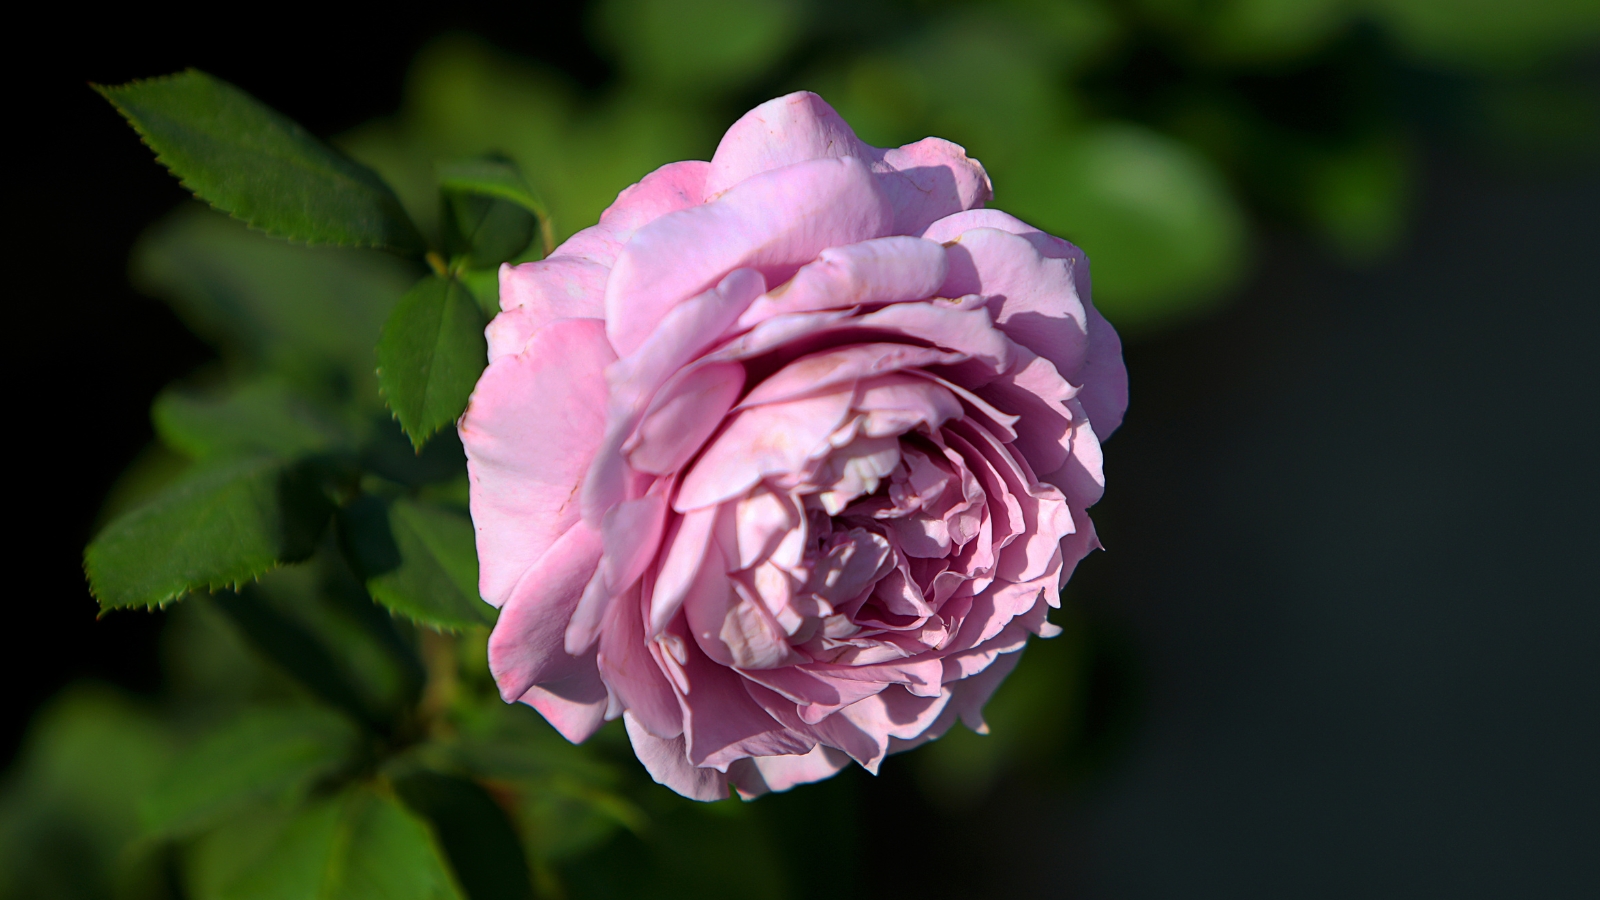 A delicate 'Blushing Lavender' rose, gracefully arched above green leaves, bathes in the warm embrace of sunlight, its petals radiating a gentle hue of purple under the golden rays.